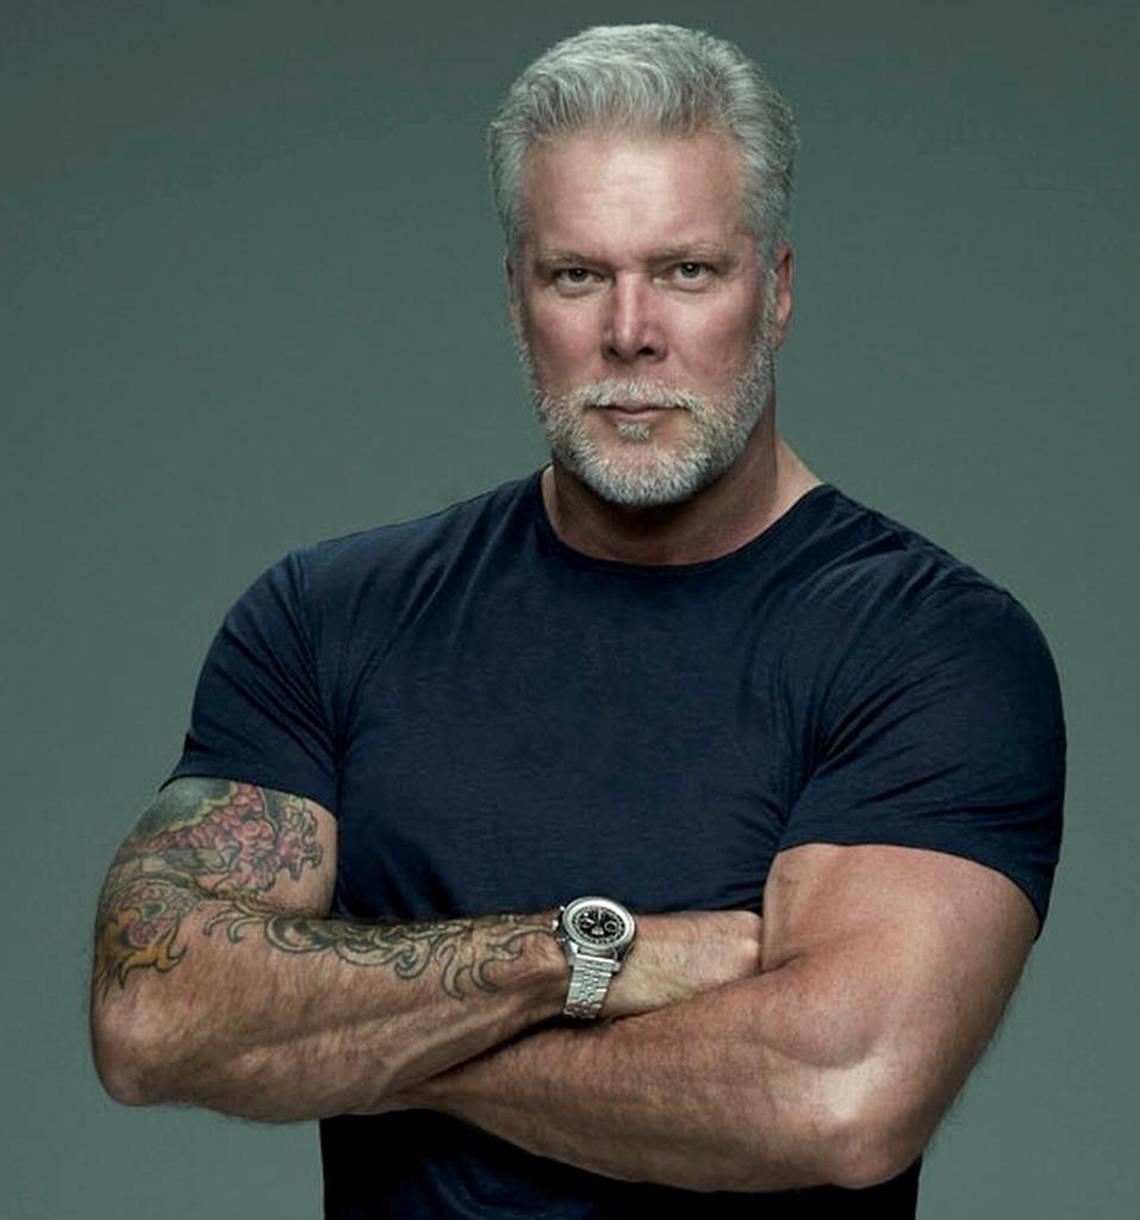 Kevin Nash a WWE legend lost his son tragically at the age of 26  The  Sports Tattoo